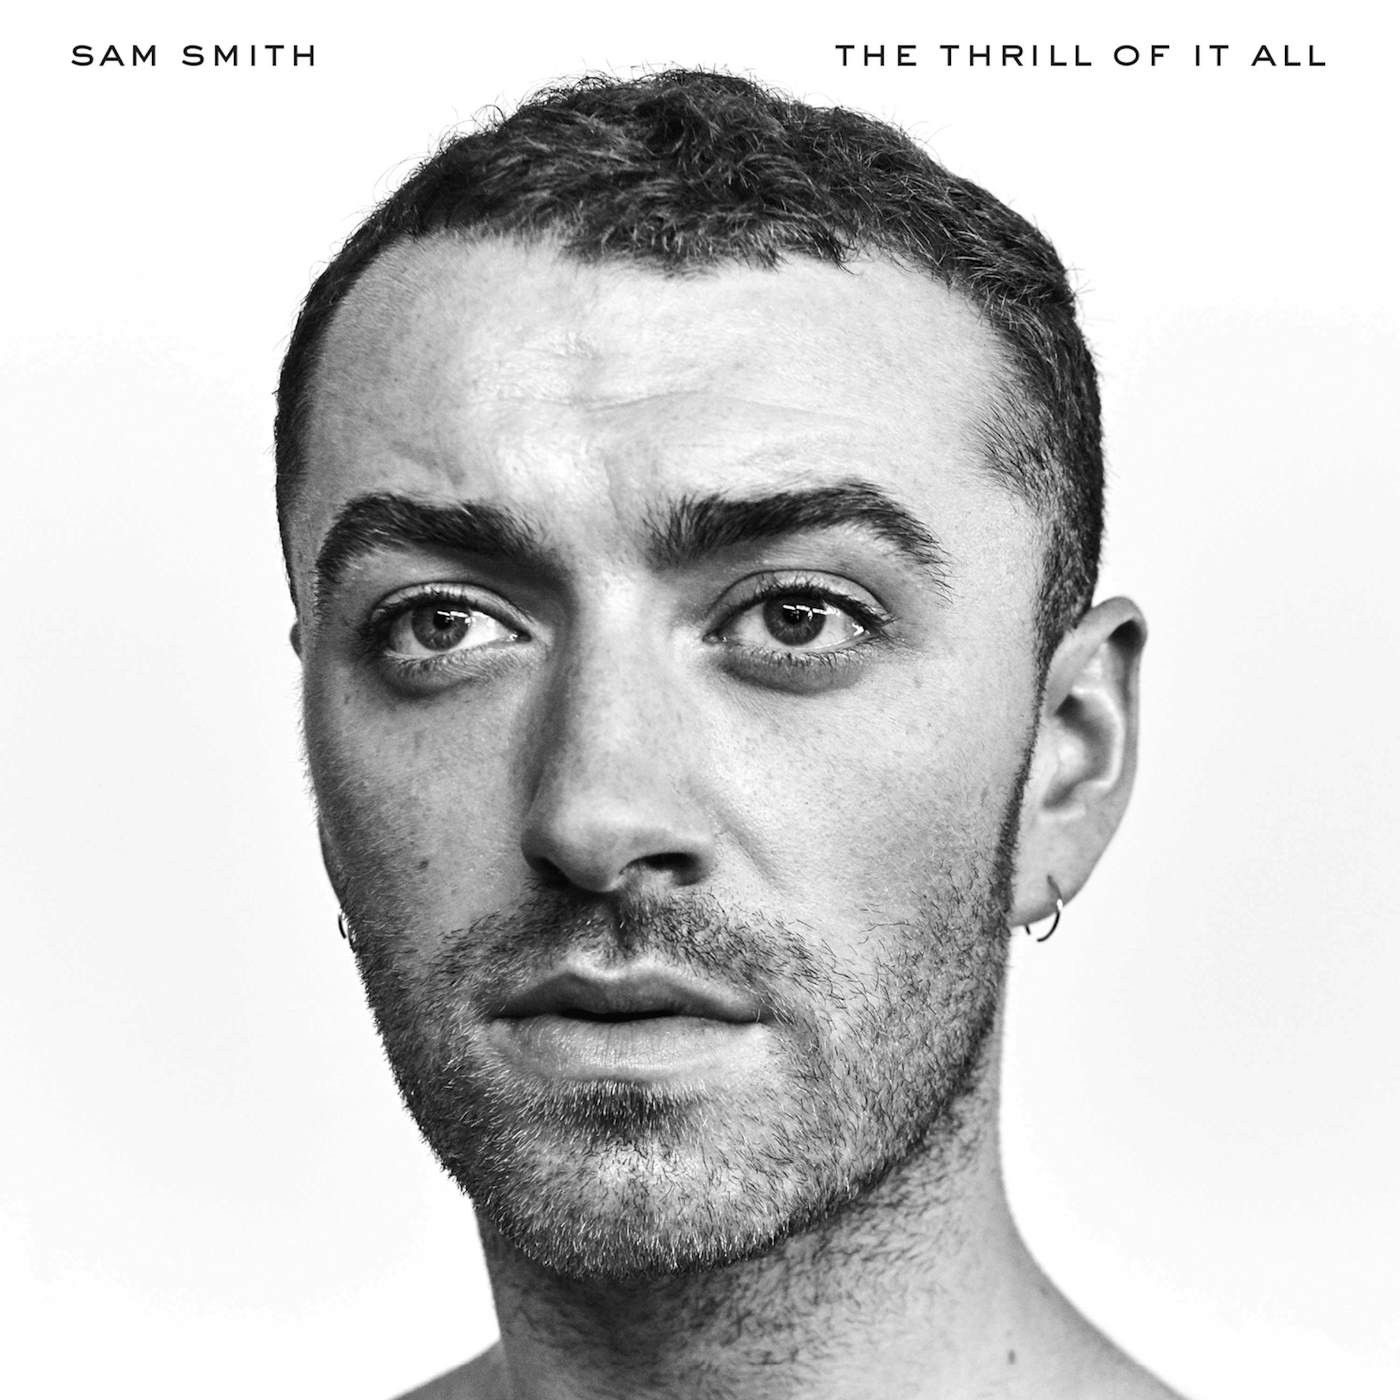 Sam Smith THRILL OF IT ALL (SPECIAL EDITION) CD